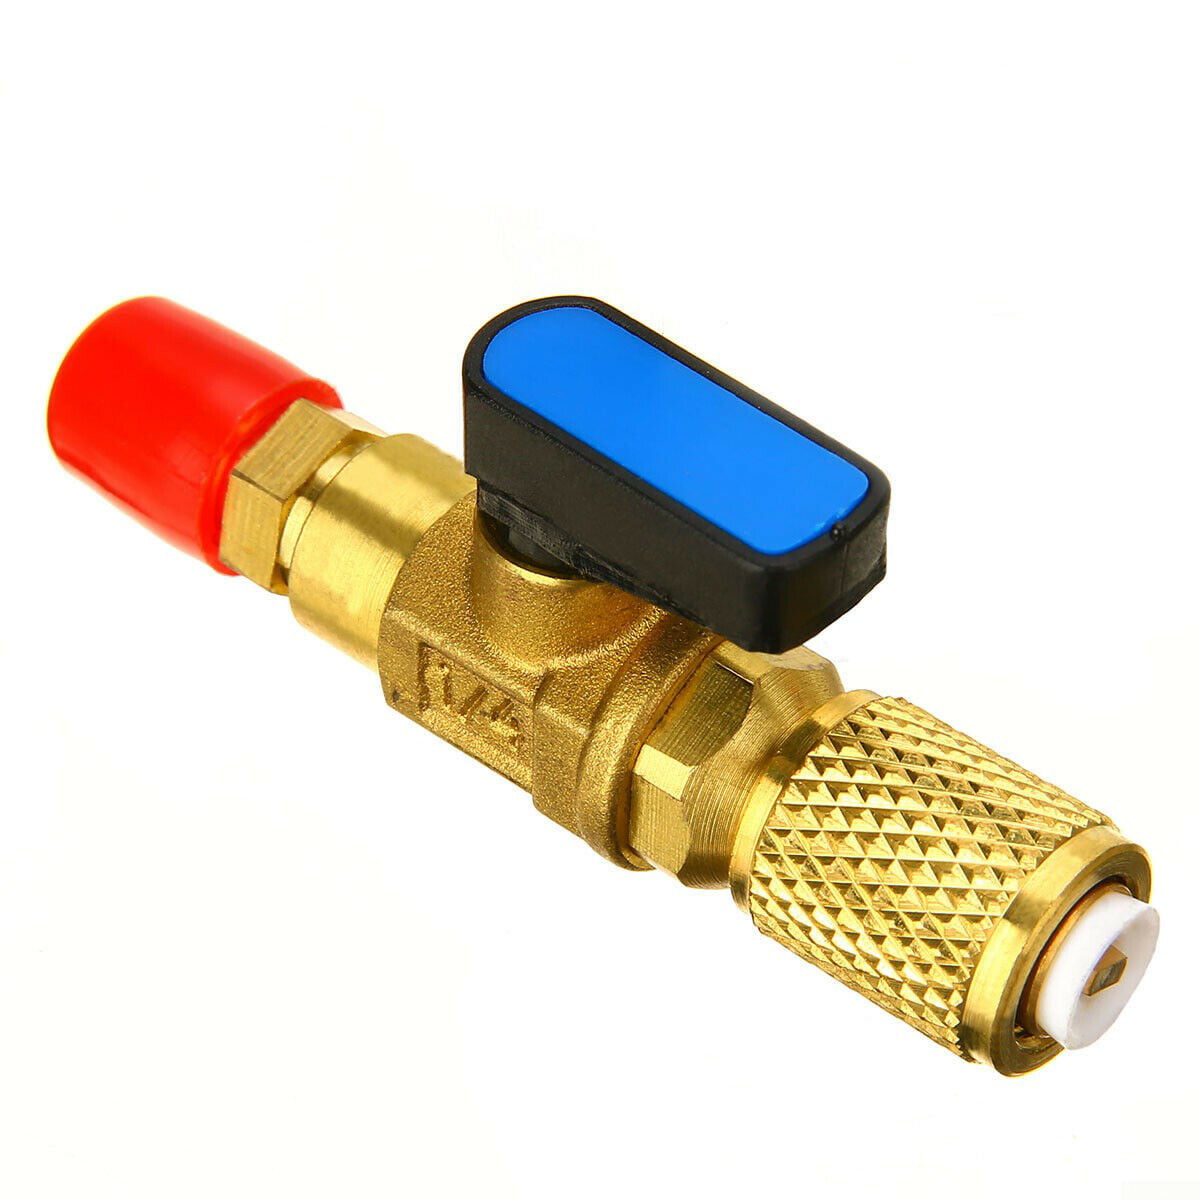 Brass HVAC A/C Straight SHUT-OFF Ball Valve Adapter Tool For R410a R134a 1/4" US 